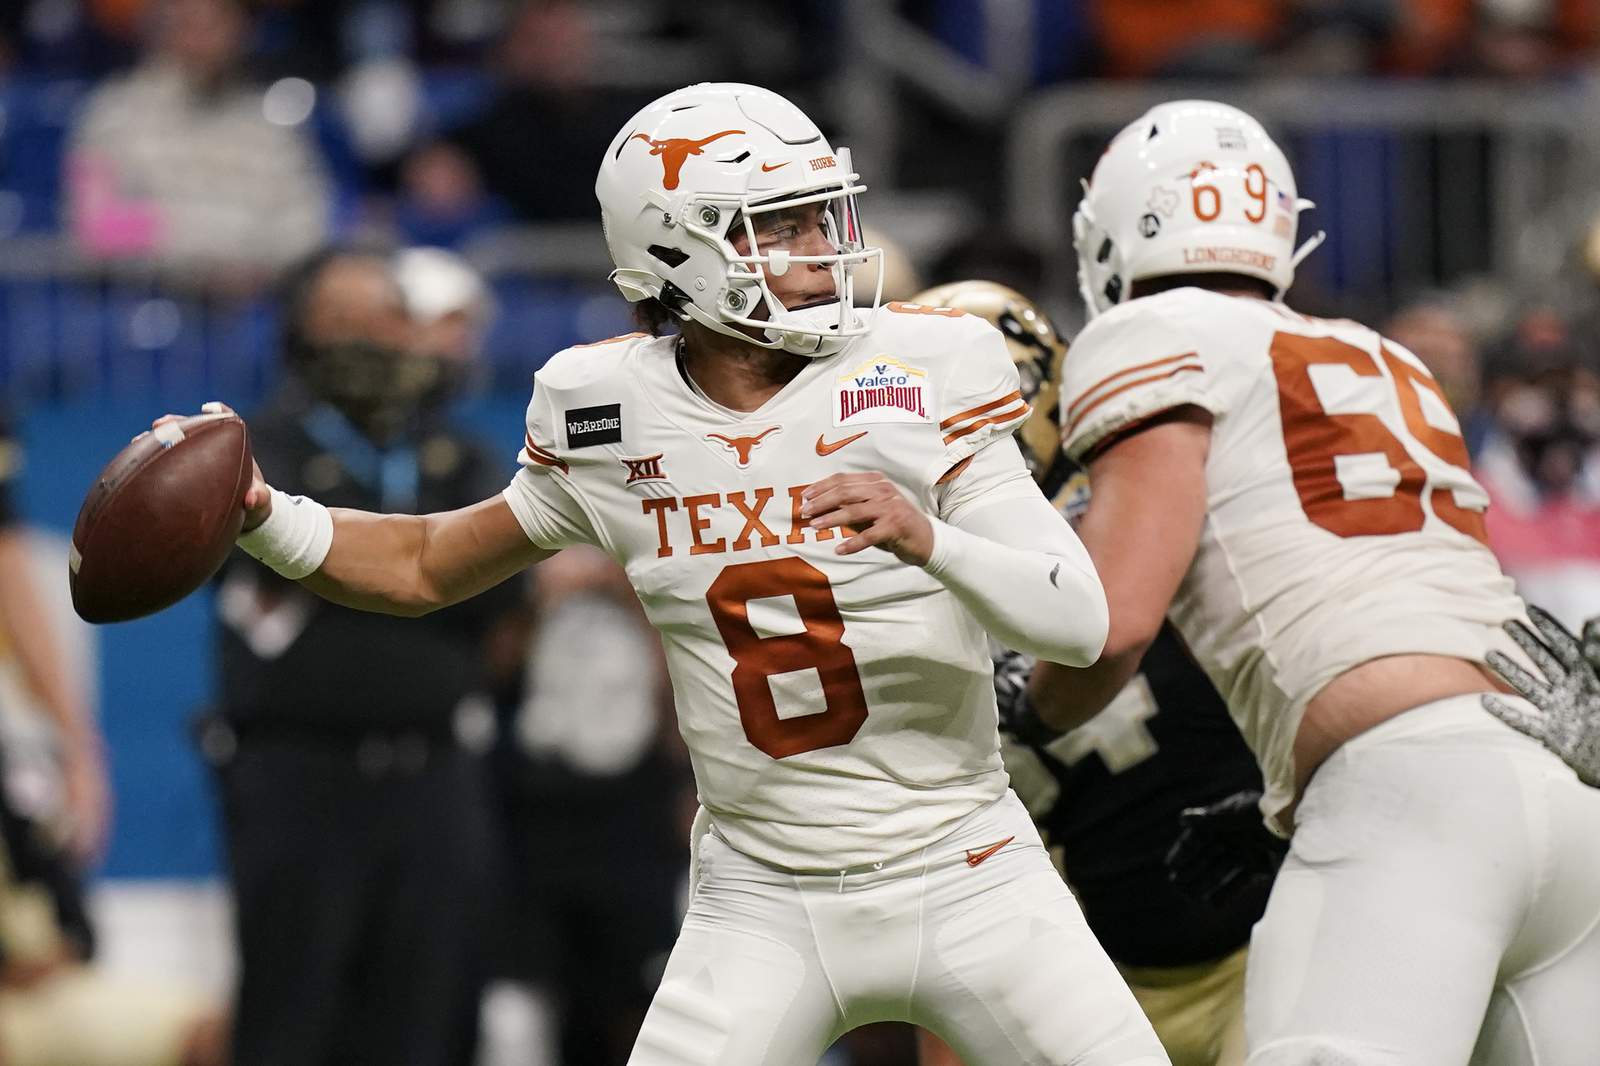 Texas overcomes Ehlinger injury, routs Colorado 55-23